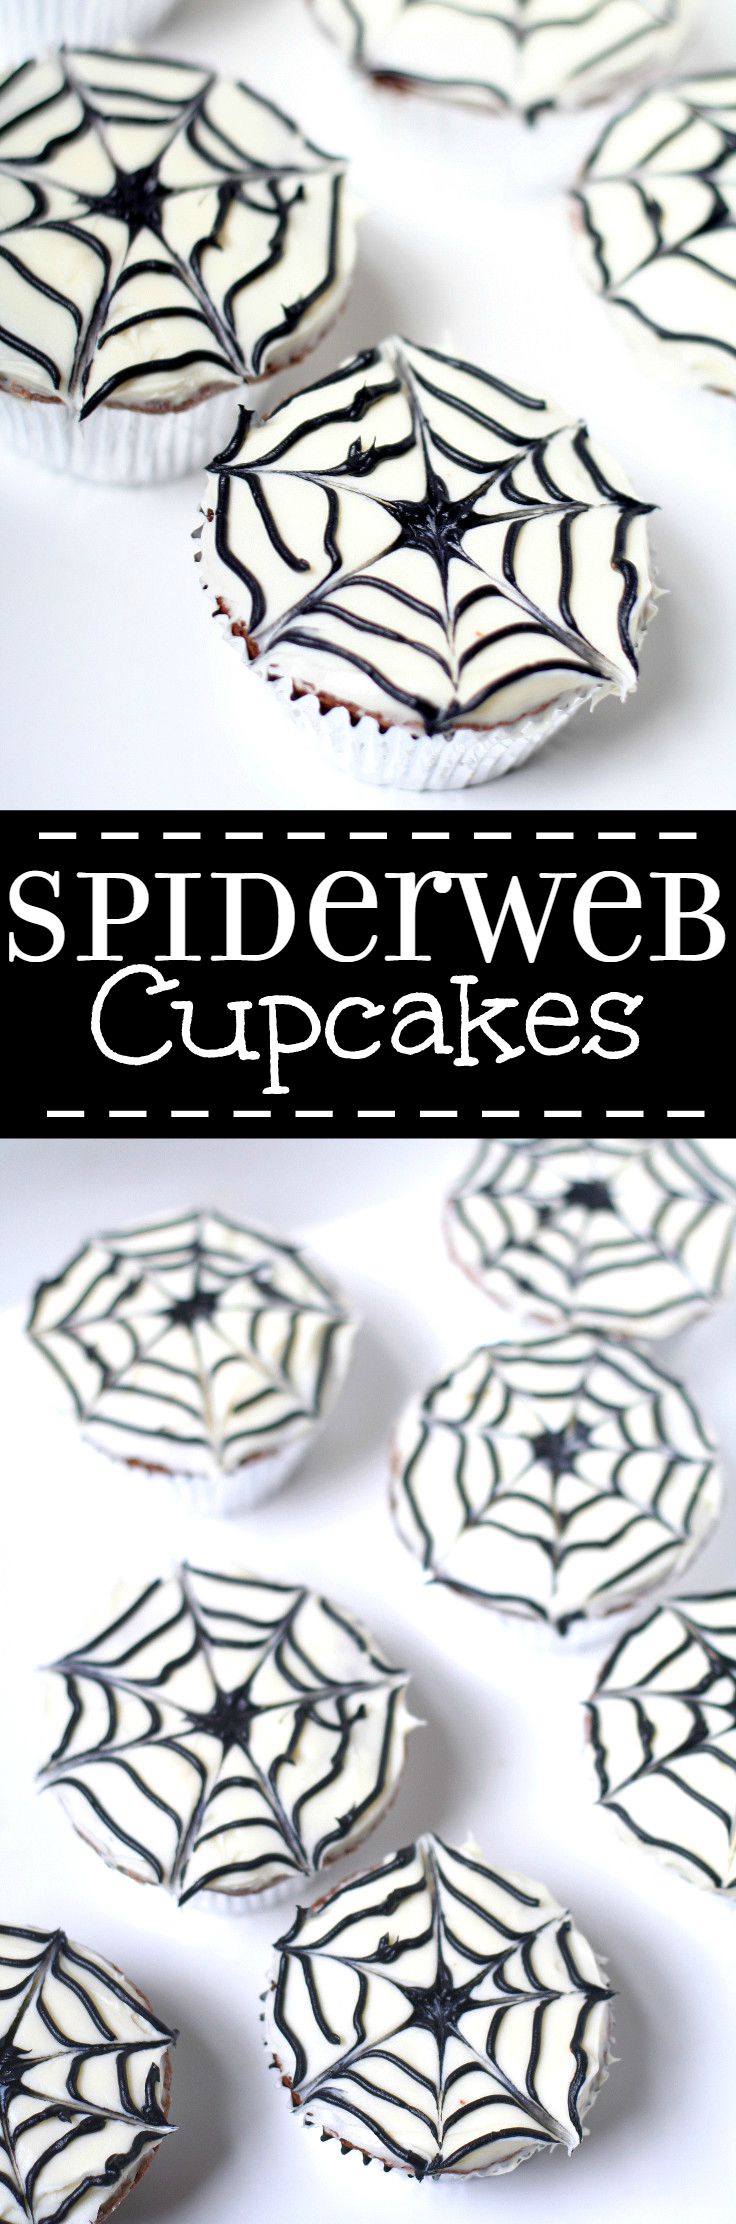 Spiderweb Cupcakes are a cute and fun but totally easy treat, perfect for Halloween or an adorable Spiderman birthday party.  They'll be a hit at your next party! Such a cute treat for kids!